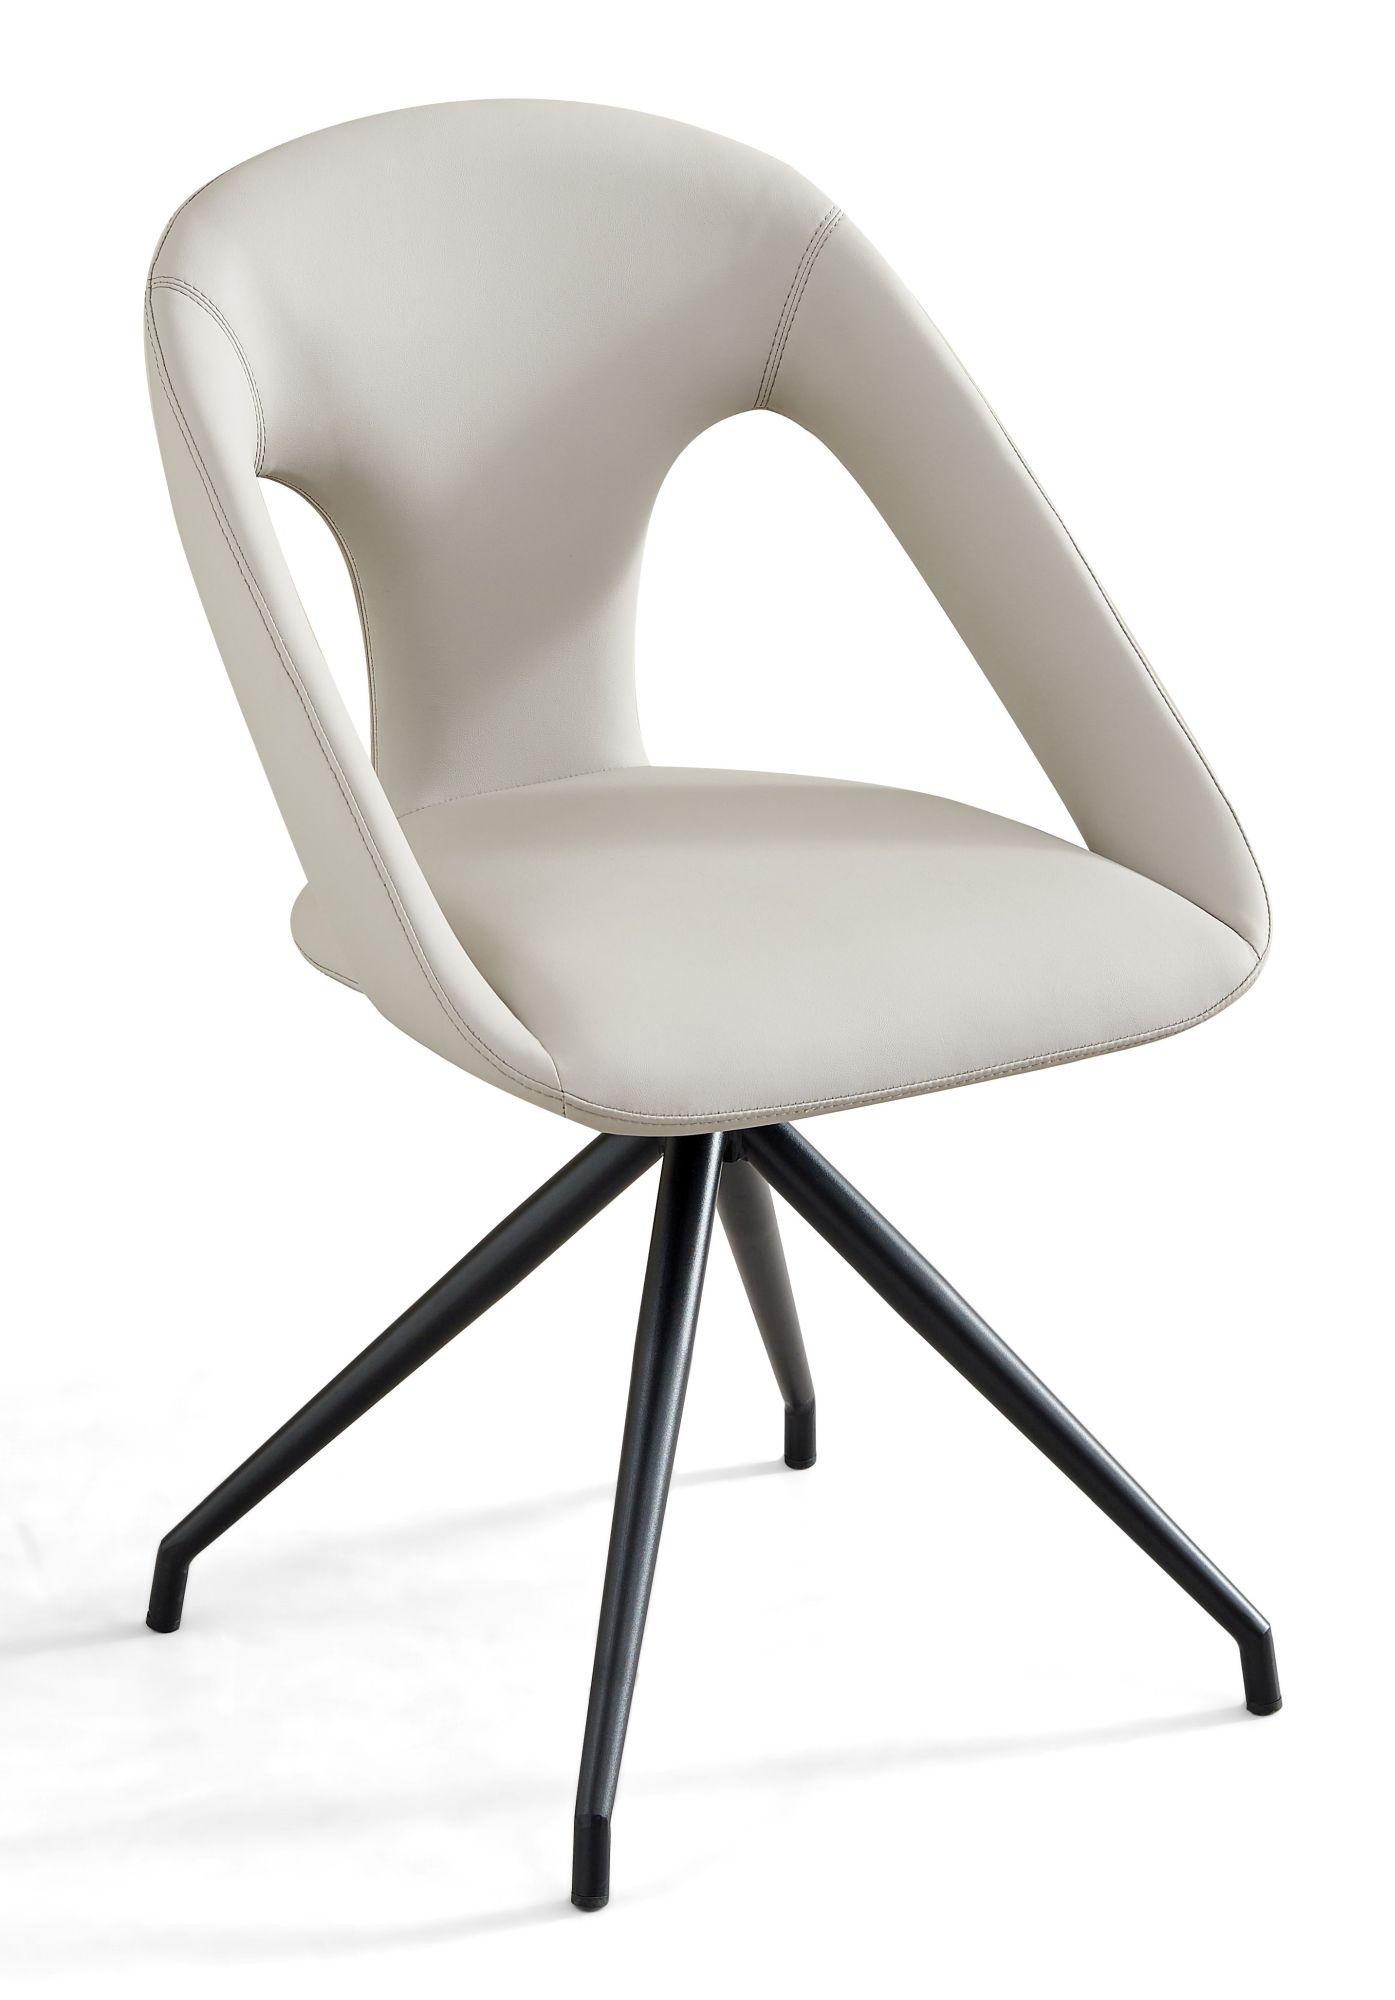 Marlow Light Grey Faux Leather Swivel Dining Chair with Black Legs